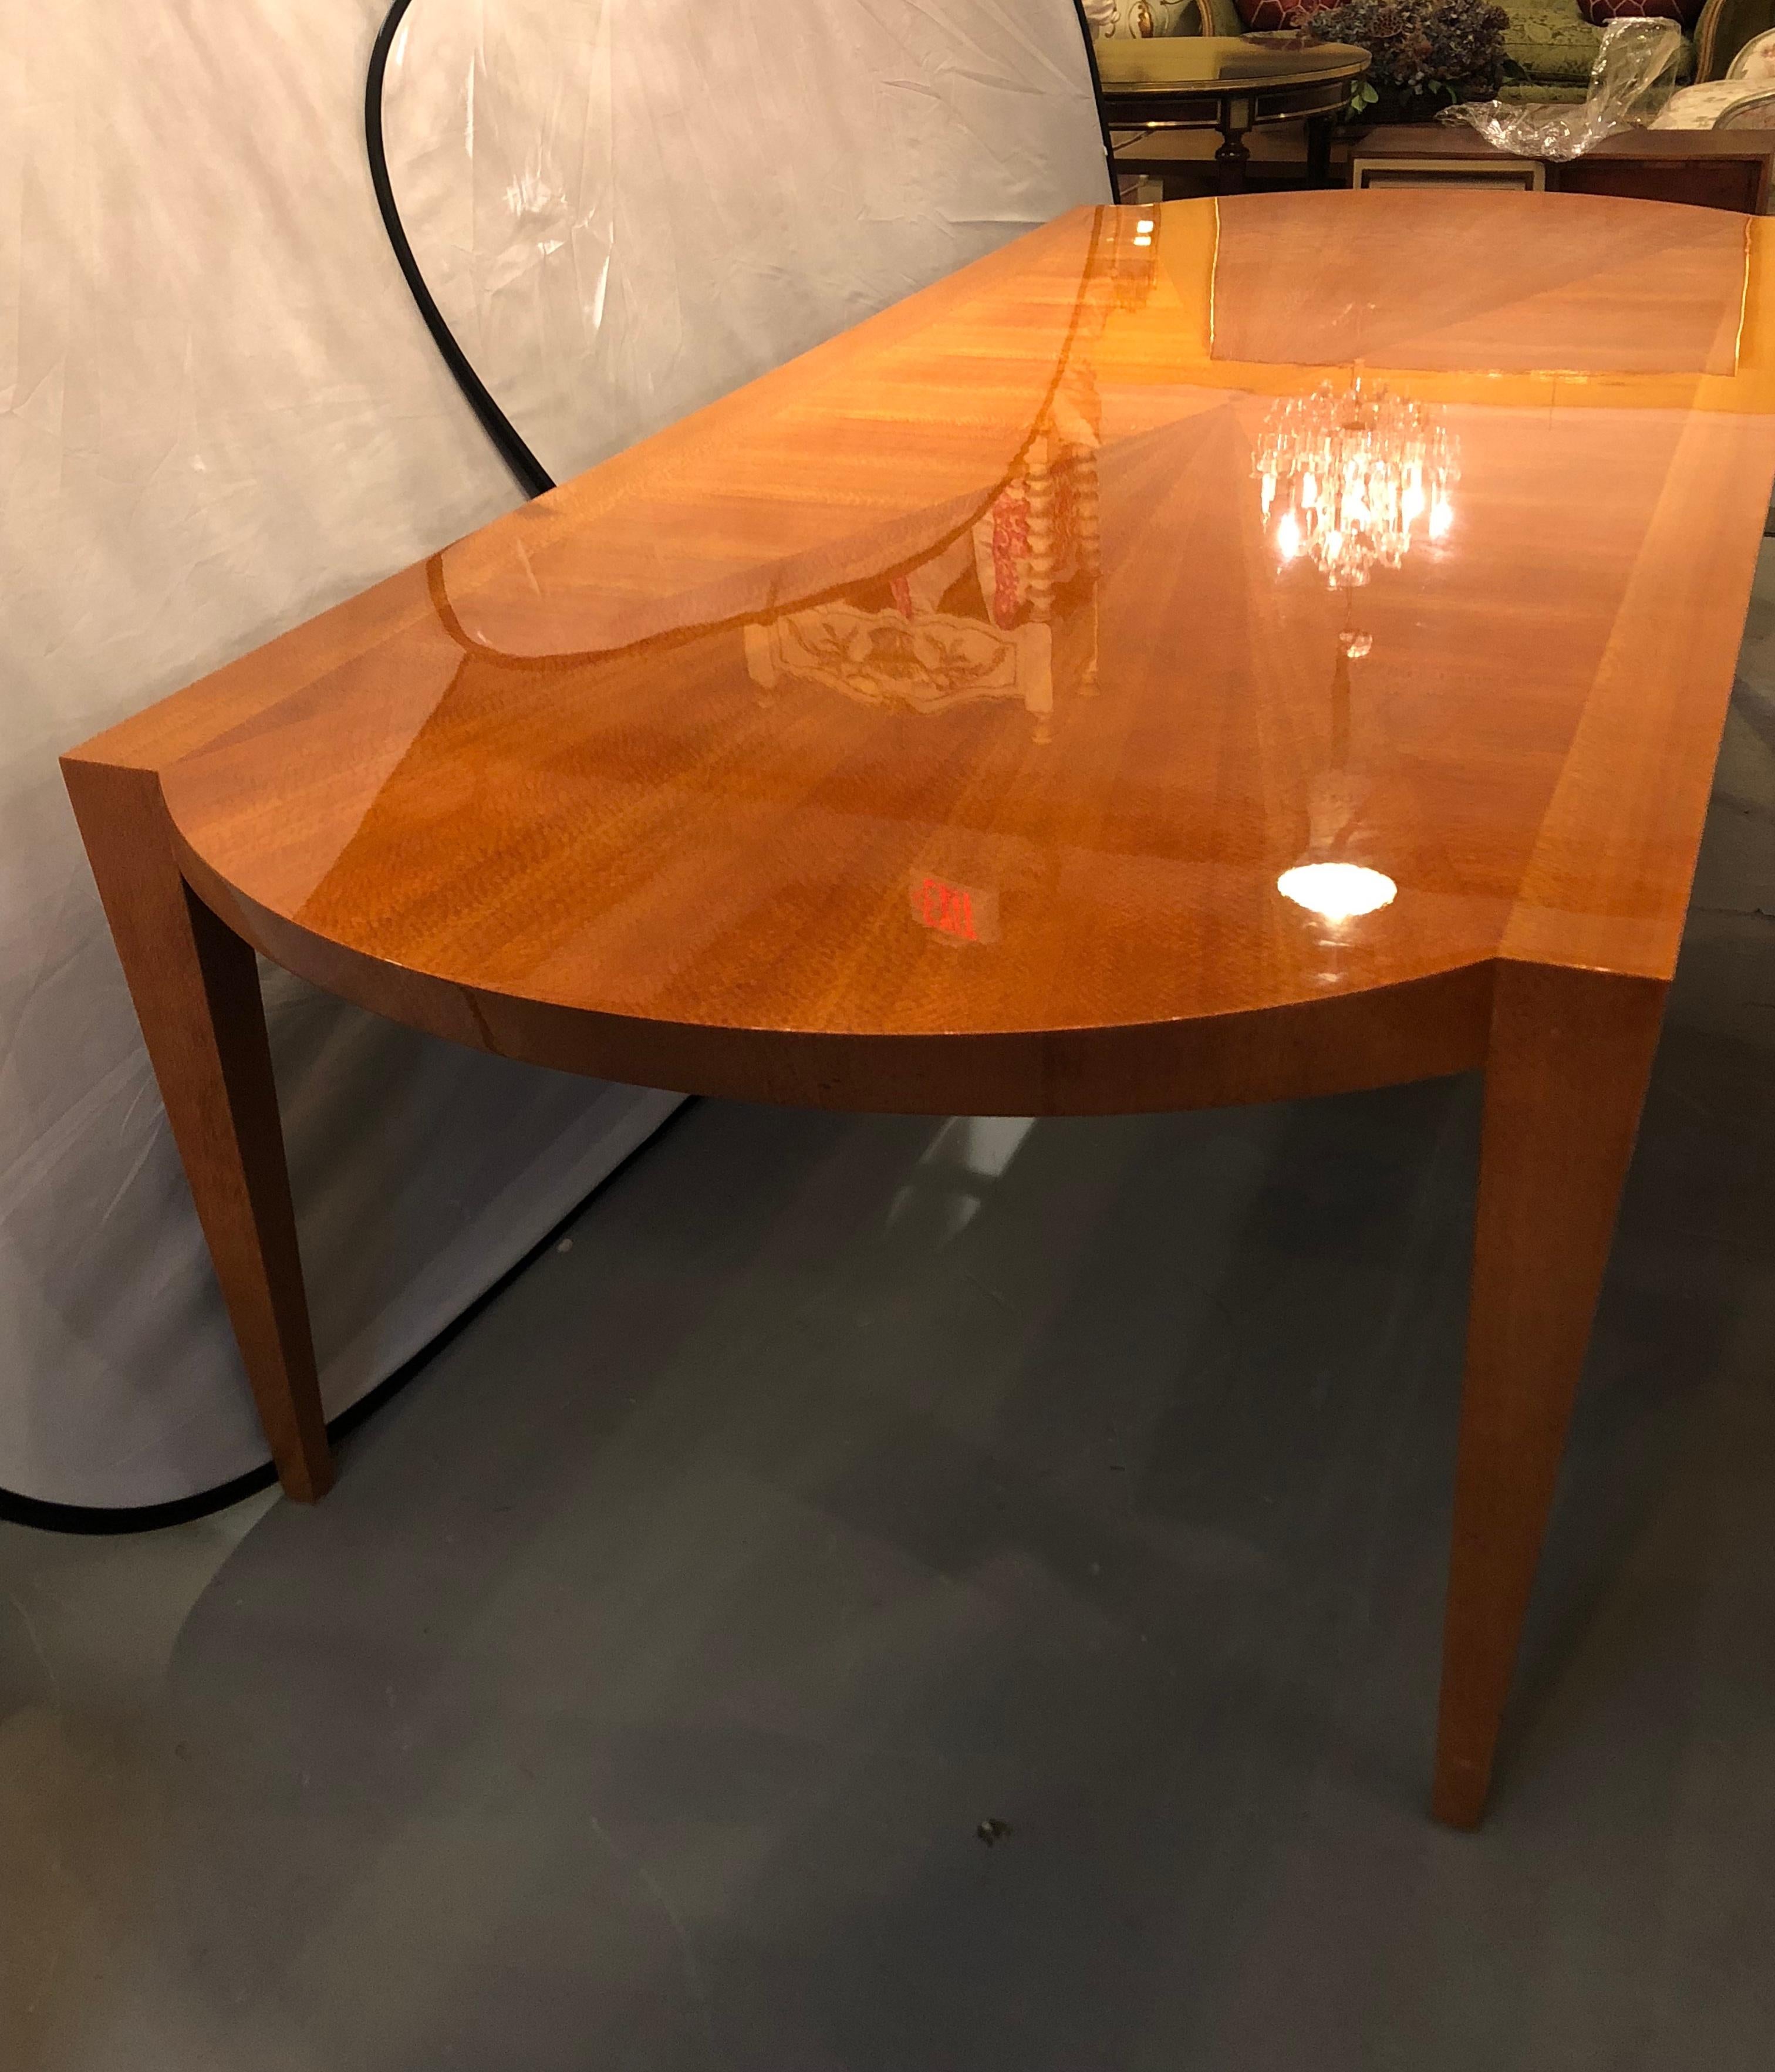 Mid-Century Modern style Heraldic Dakota Jackson Australian Lacewood dining or conference table. Arched aprons and tapered trapezoidal legs. This table is in very nice condition with a fine sunburst top. The owner having paid in excess of $25,000 to